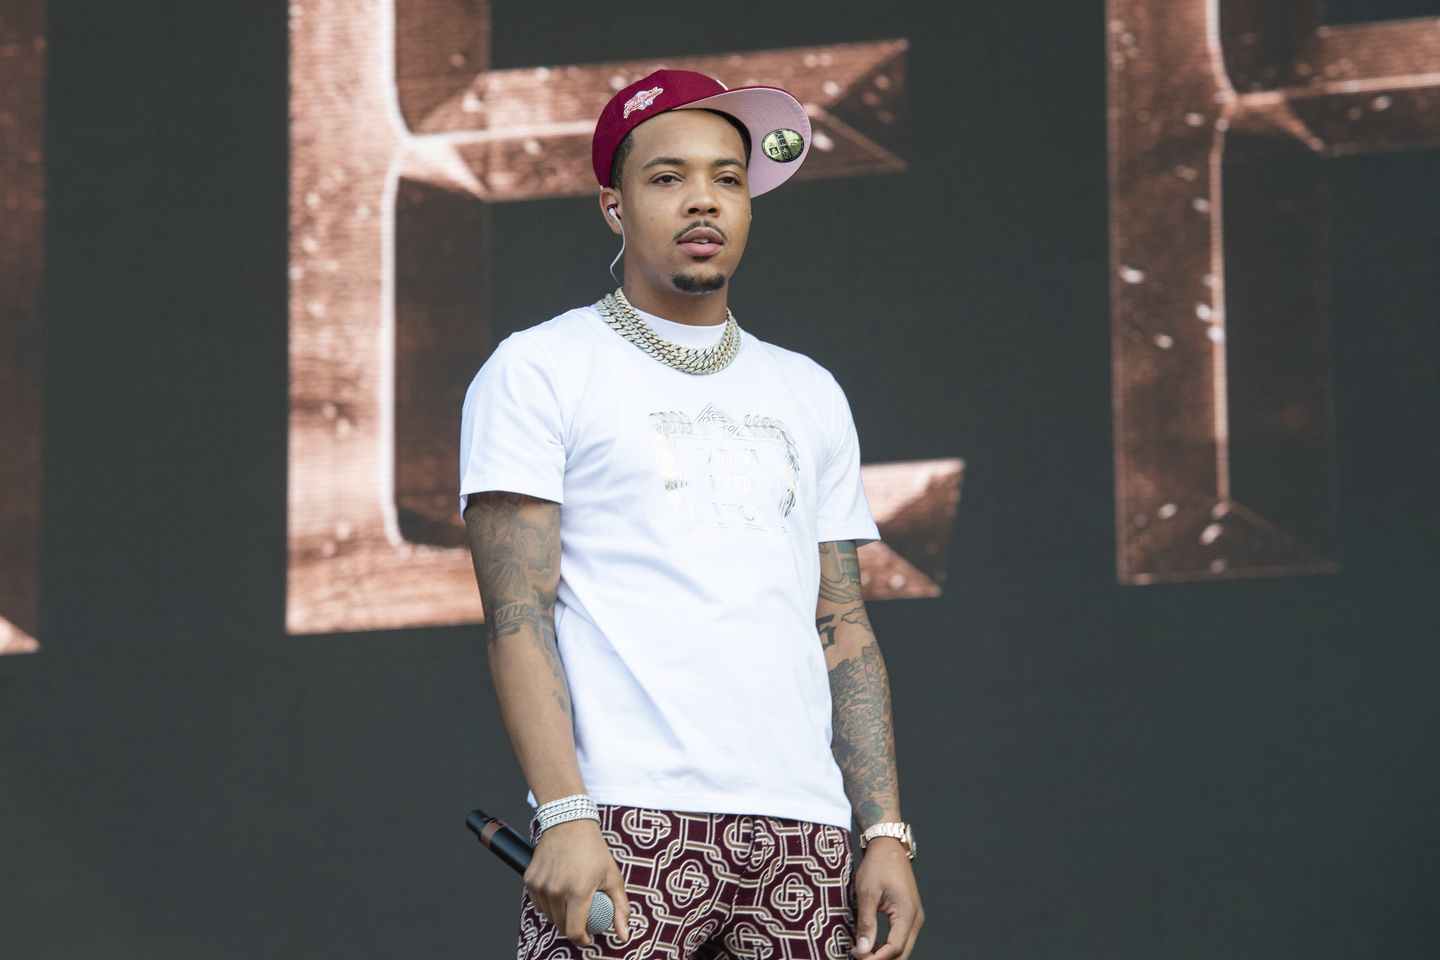 Chicago-area rapper 'G Herbo' pleads guilty to defrauding businesses using stolen credit card